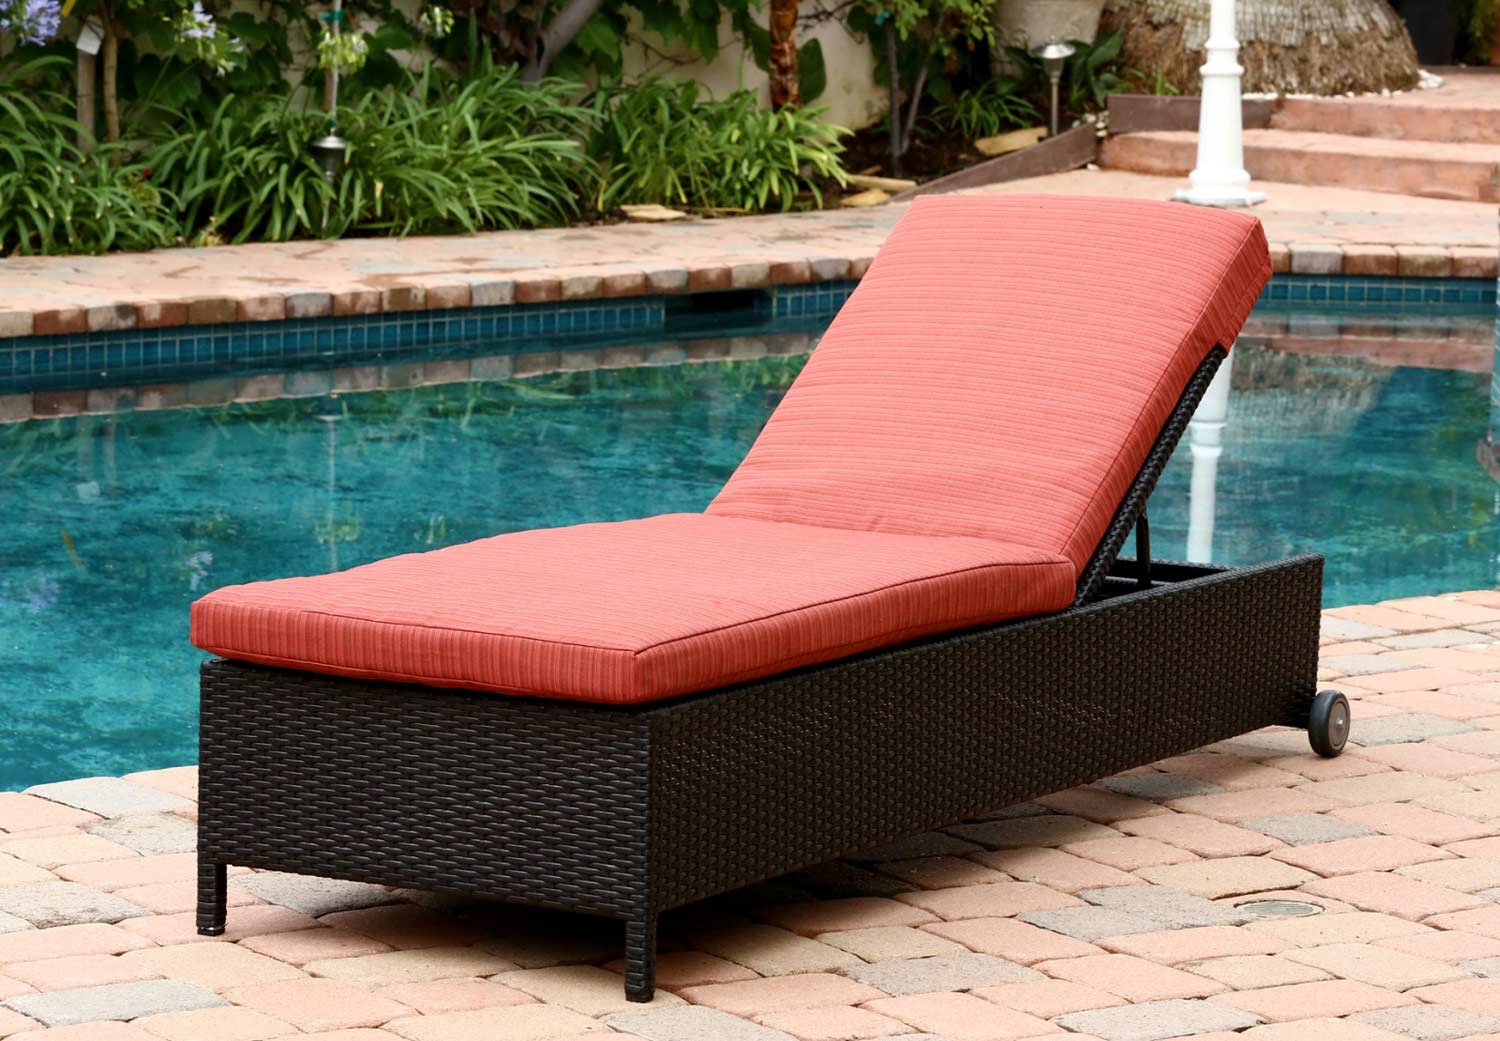 Abbyson Living Ventura Outdoor Wicker Chaise Lounge with Cushion - Black